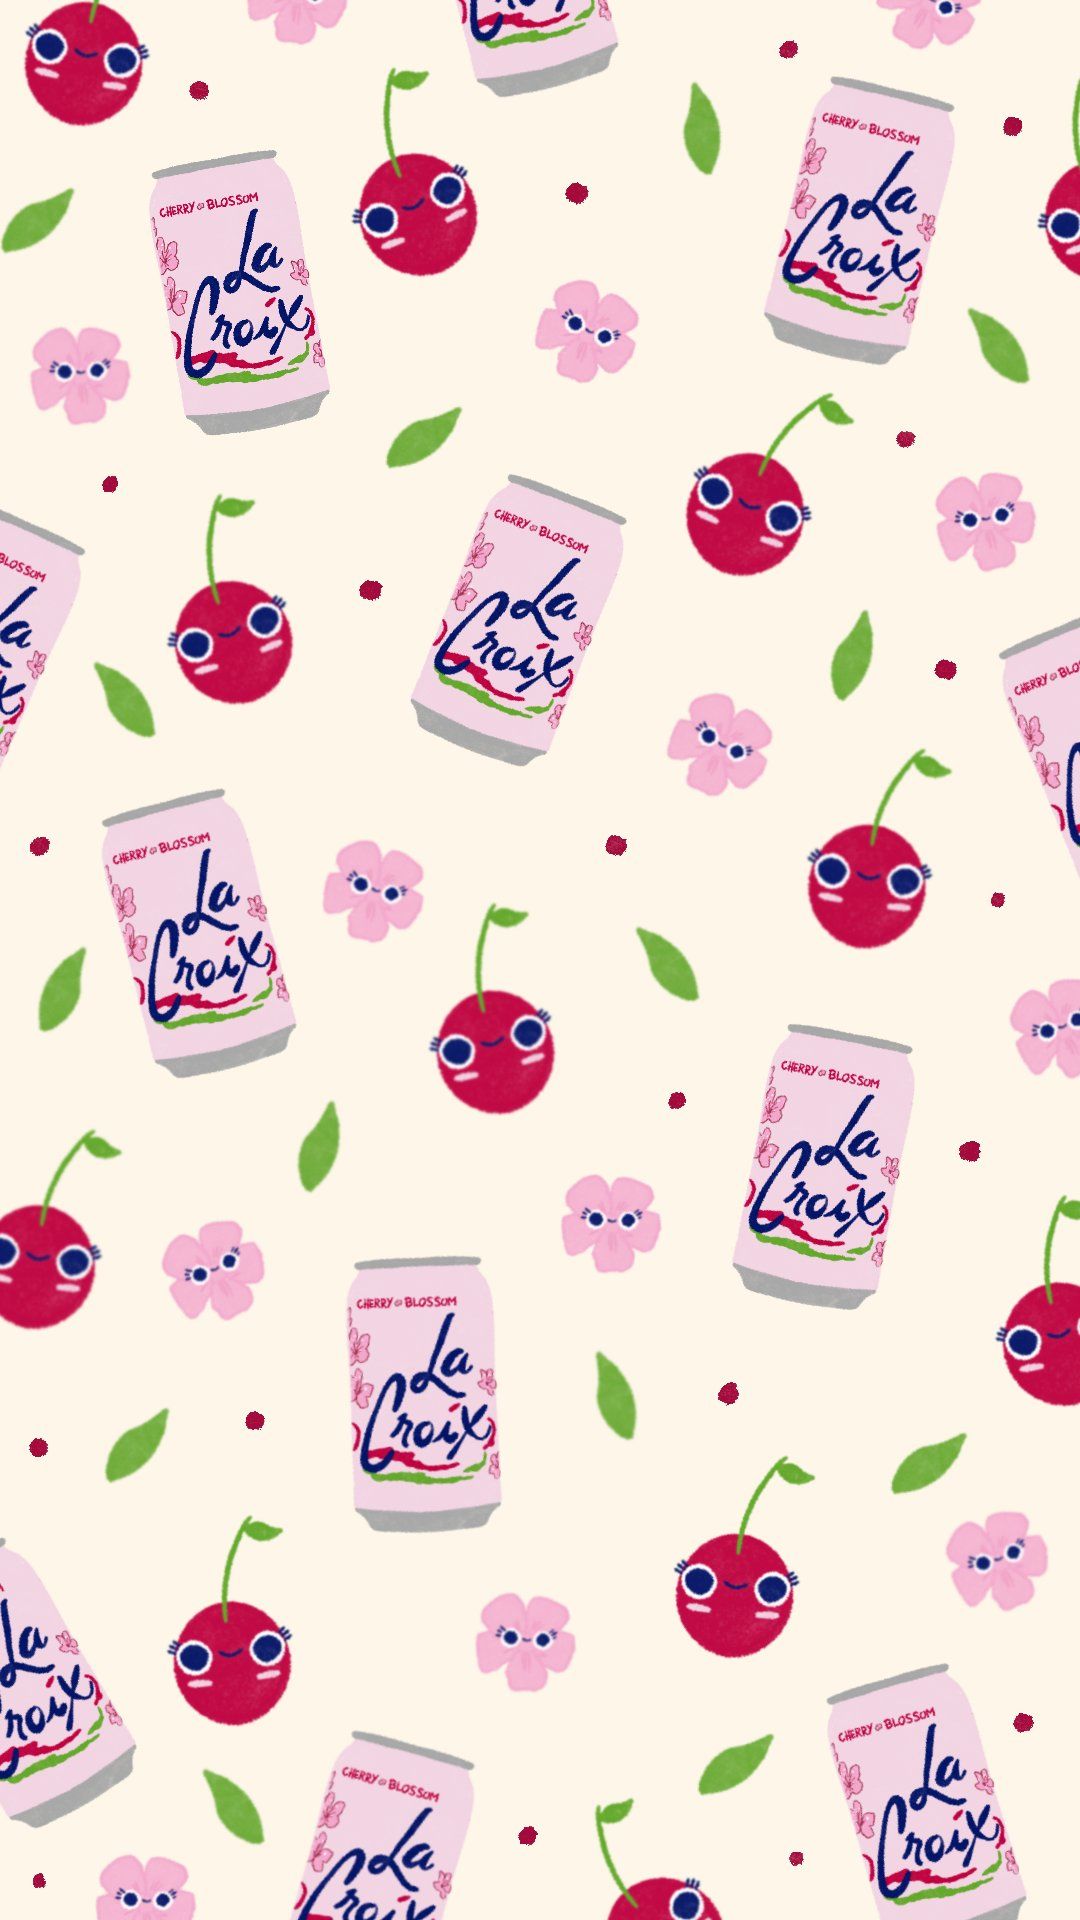 LaCroix Water wallpaper are the cherry on top to a perfect Saturday!